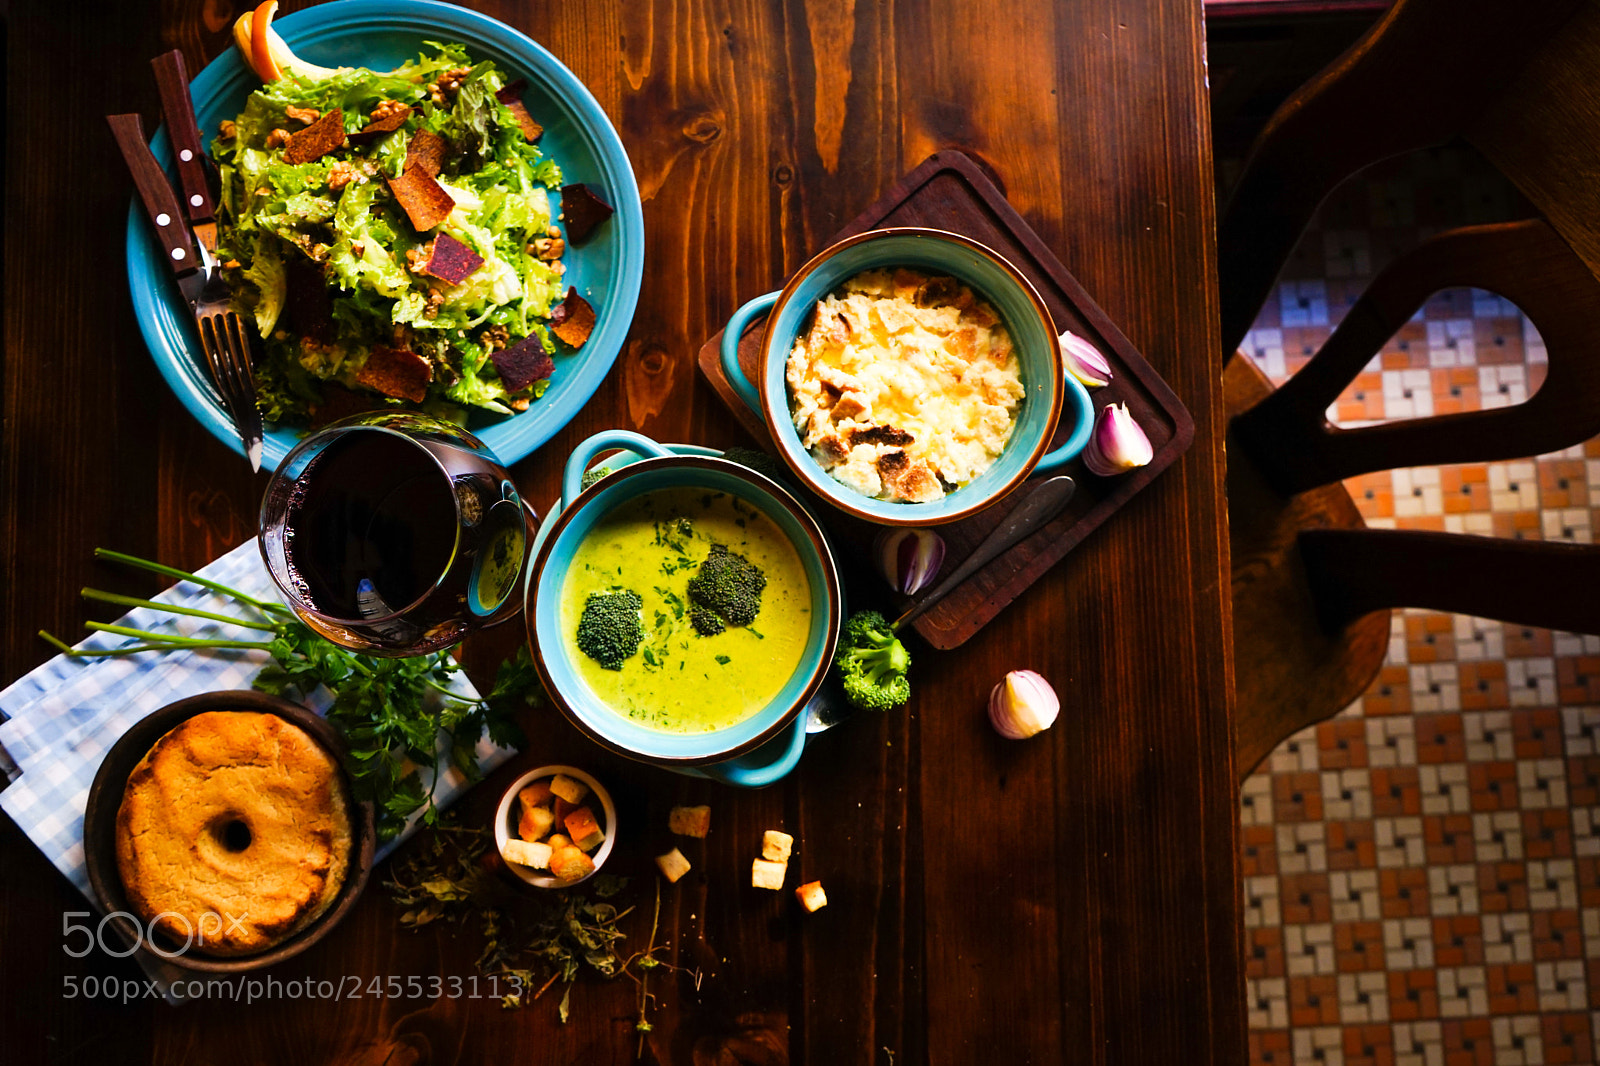 Sony a7 sample photo. Rustic dinner set photography